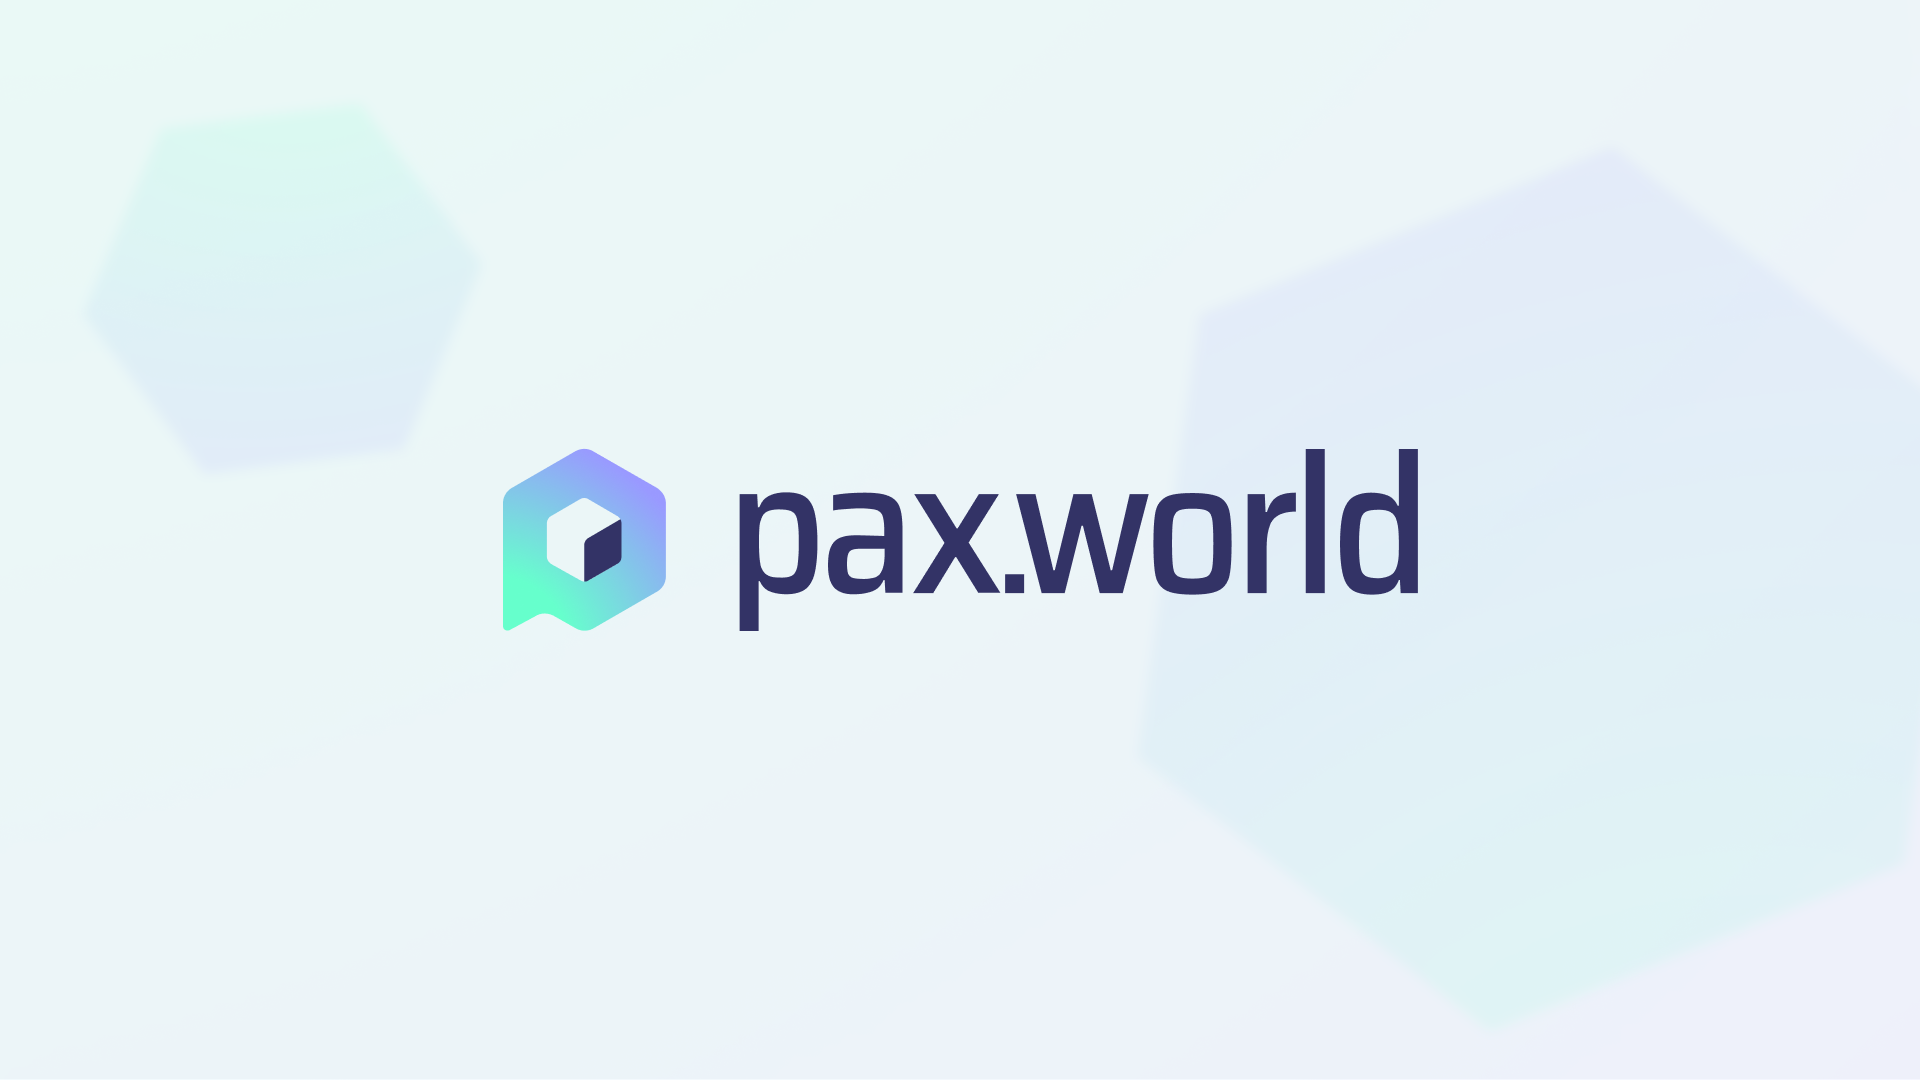 What is Pax.world (PAXW)